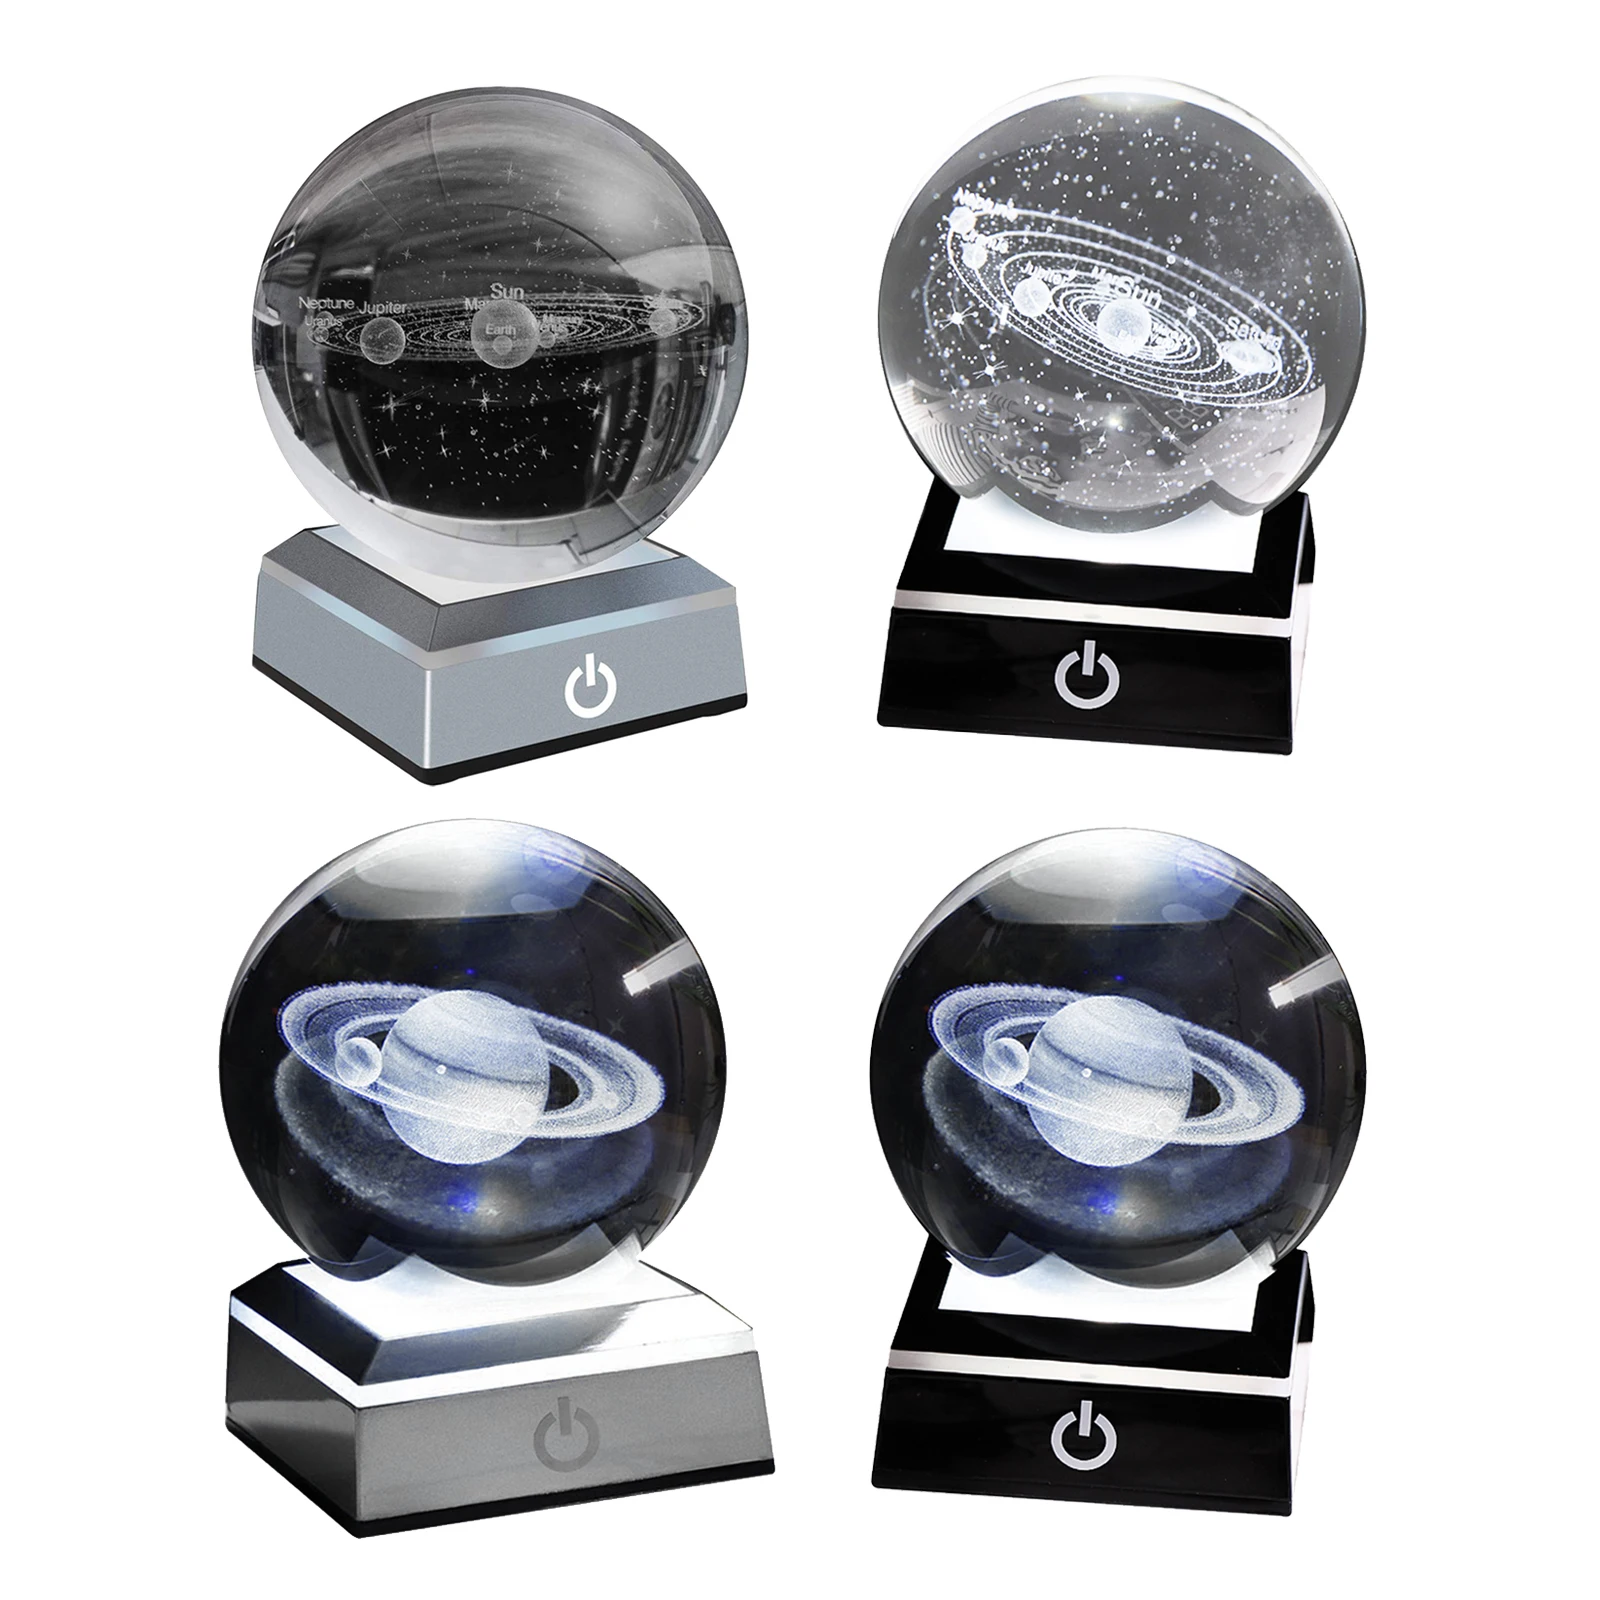 80mm K9 Crystal Solar System Planet Globe 3D  Engraved Sun System Ball with Touch Switch LED Light Base Astronomy Gifts